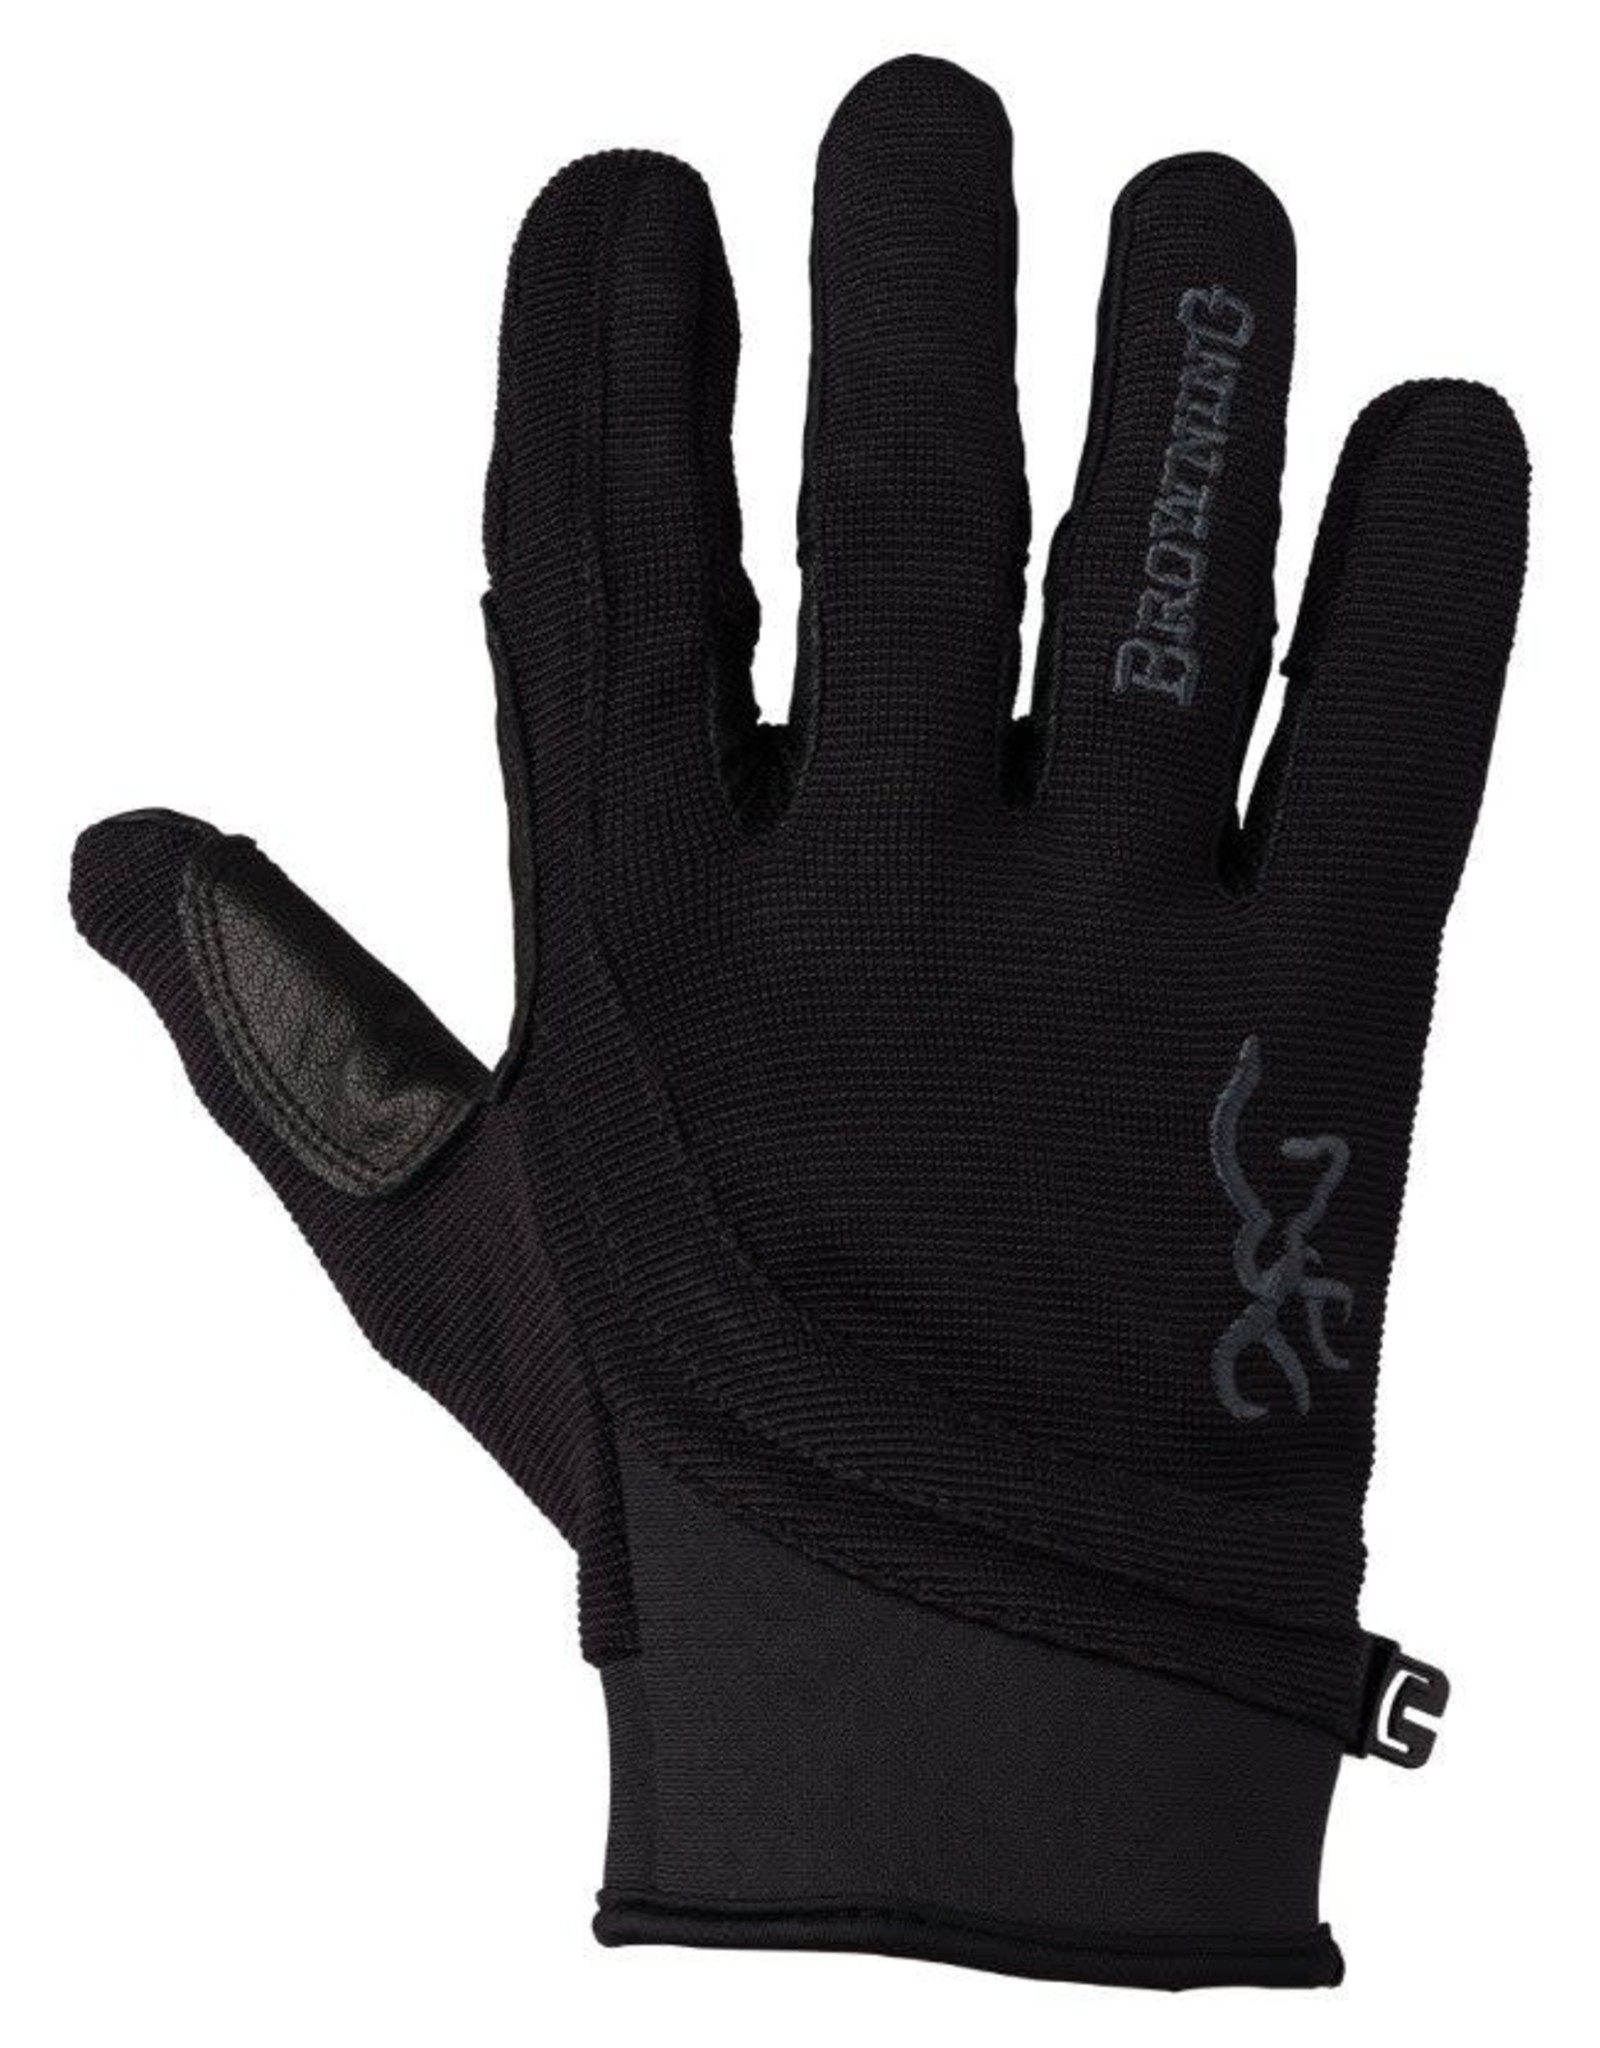 Browning Ace Shooting Glove - Blk/Blk - SM